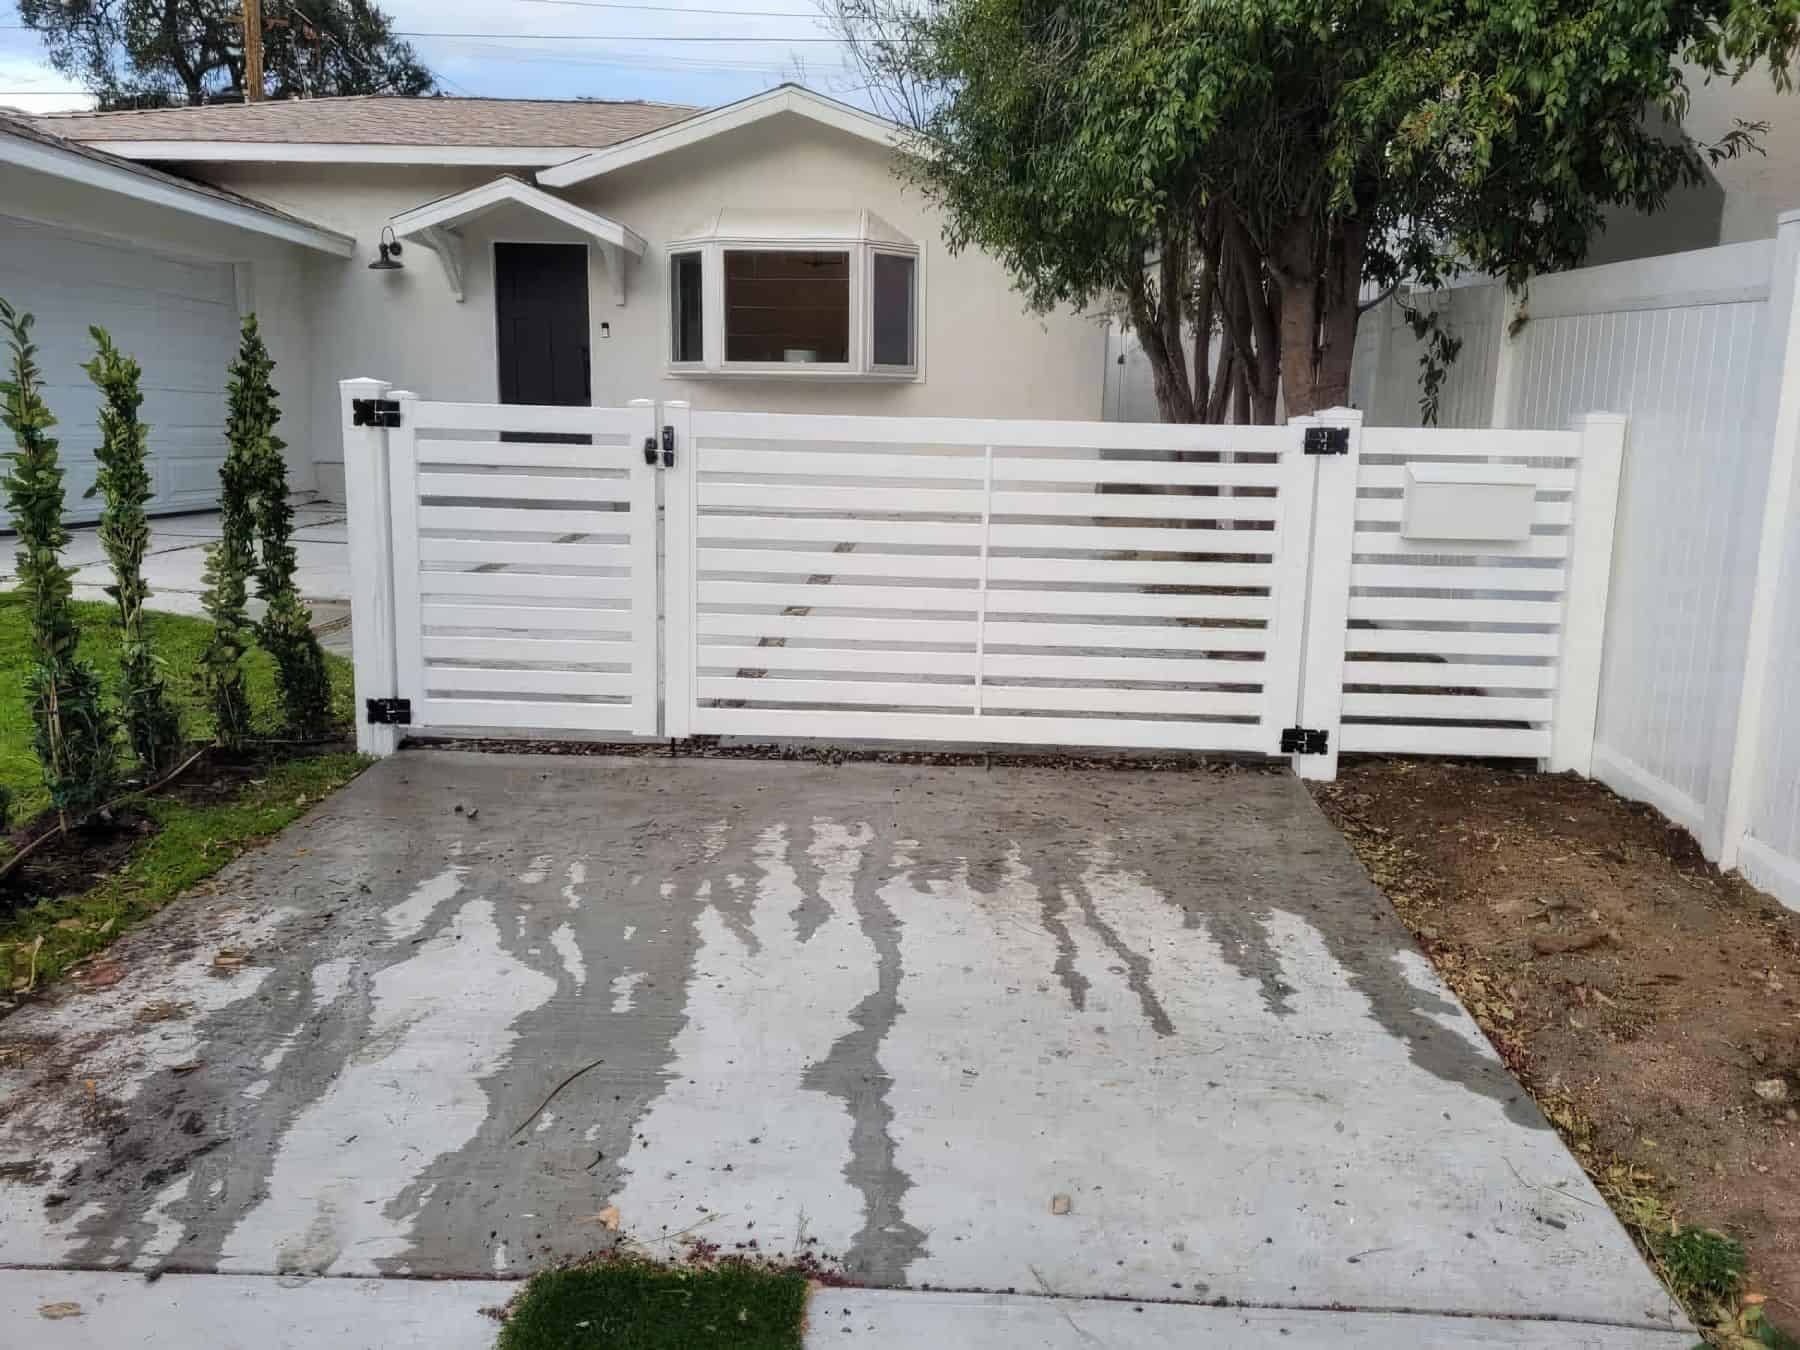 Vinyl fence gate leading from concrete driveway into charming suburban home surrounded by trees with a grassy front lawn.